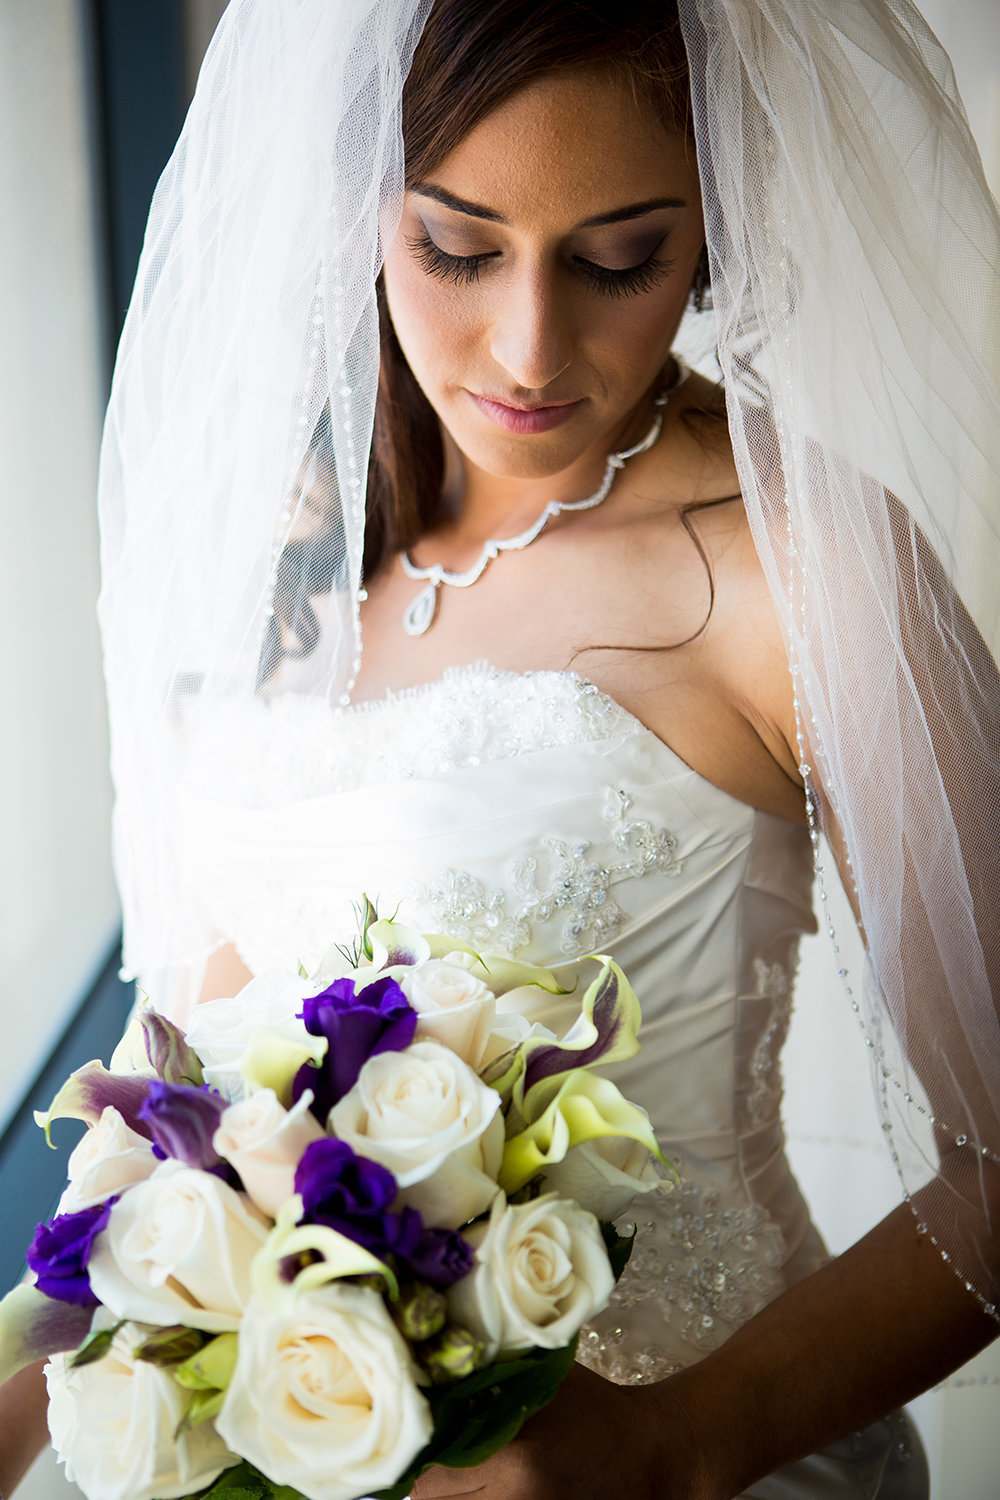 Pensive moment with purple flowers and white roses.